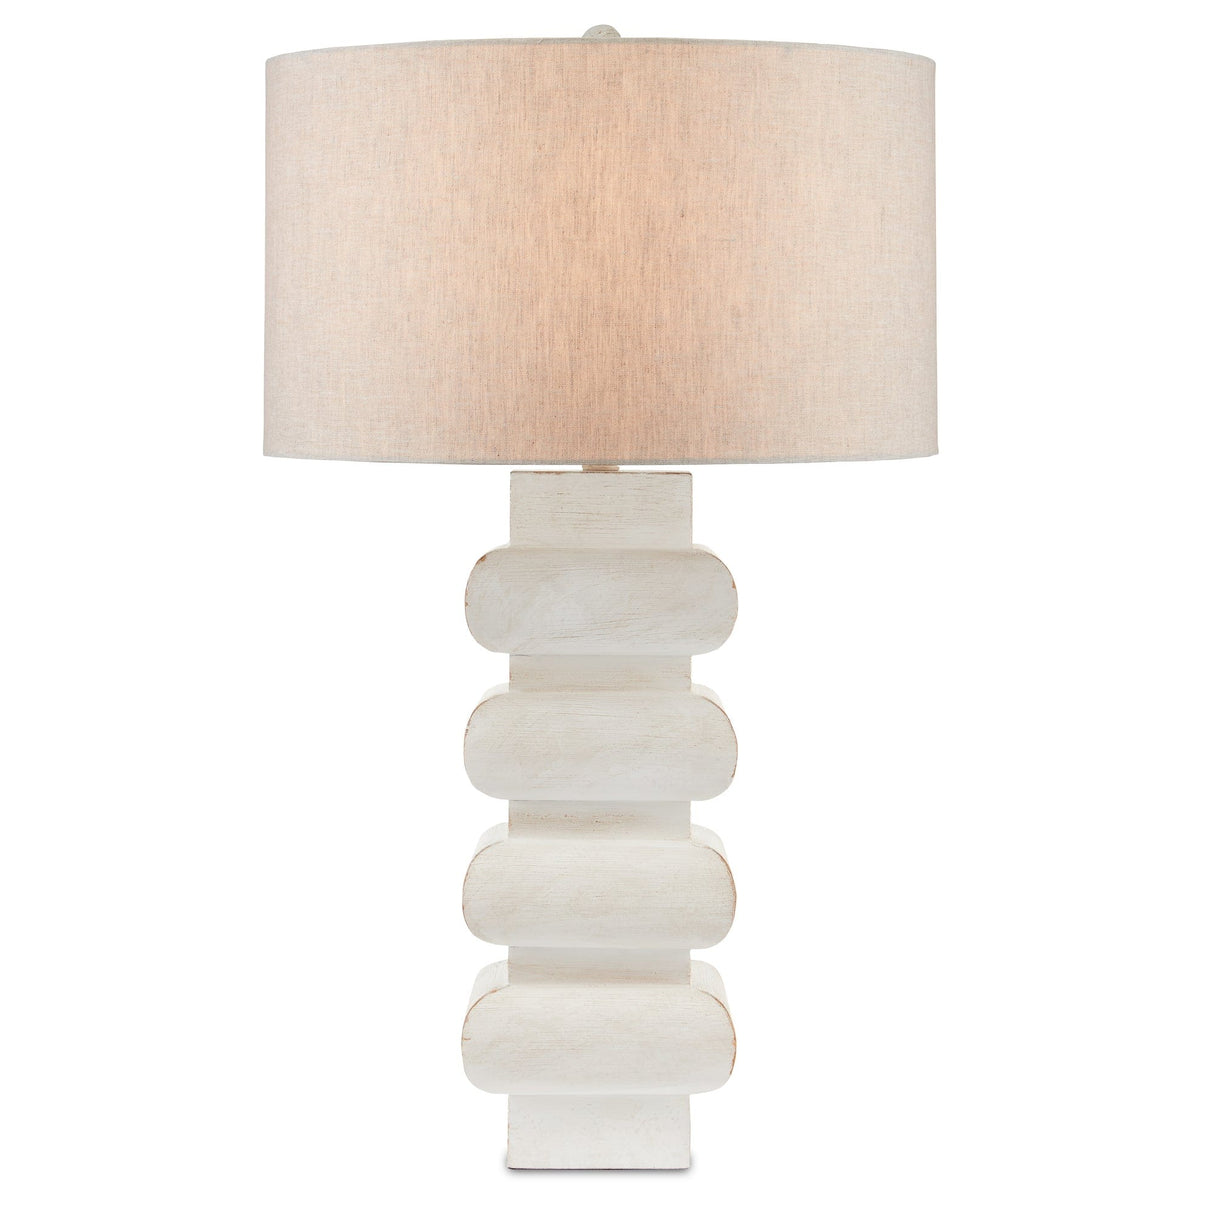 Currey & Company Blondel Table Lamp Lamps currey-co-6000-0769